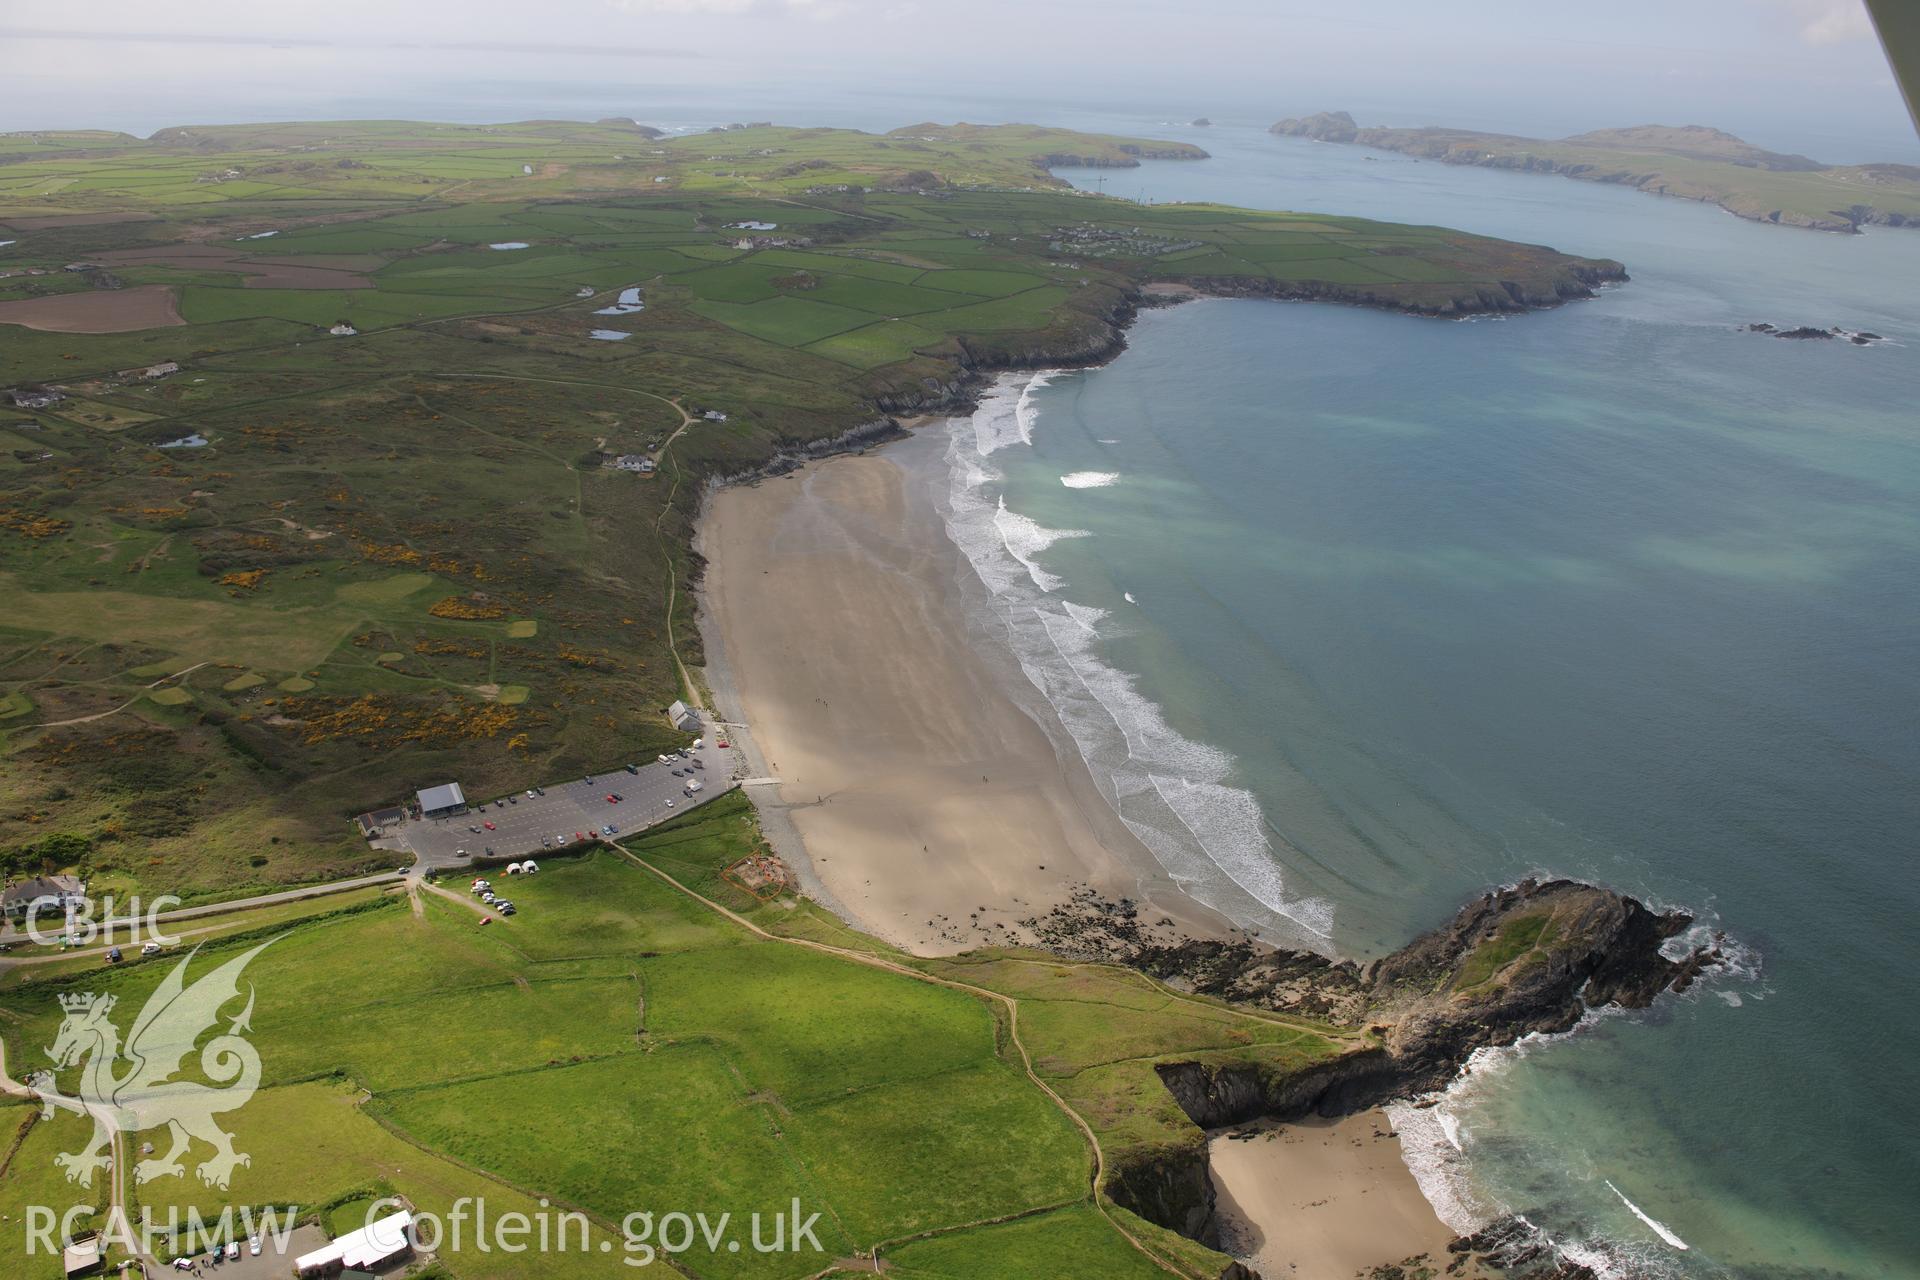 Whitesands Bay or Porth Mawr, near St. Davids. Oblique aerial photograph taken during the Royal Commission's programme of archaeological aerial reconnaissance by Toby Driver on 13th May 2015.